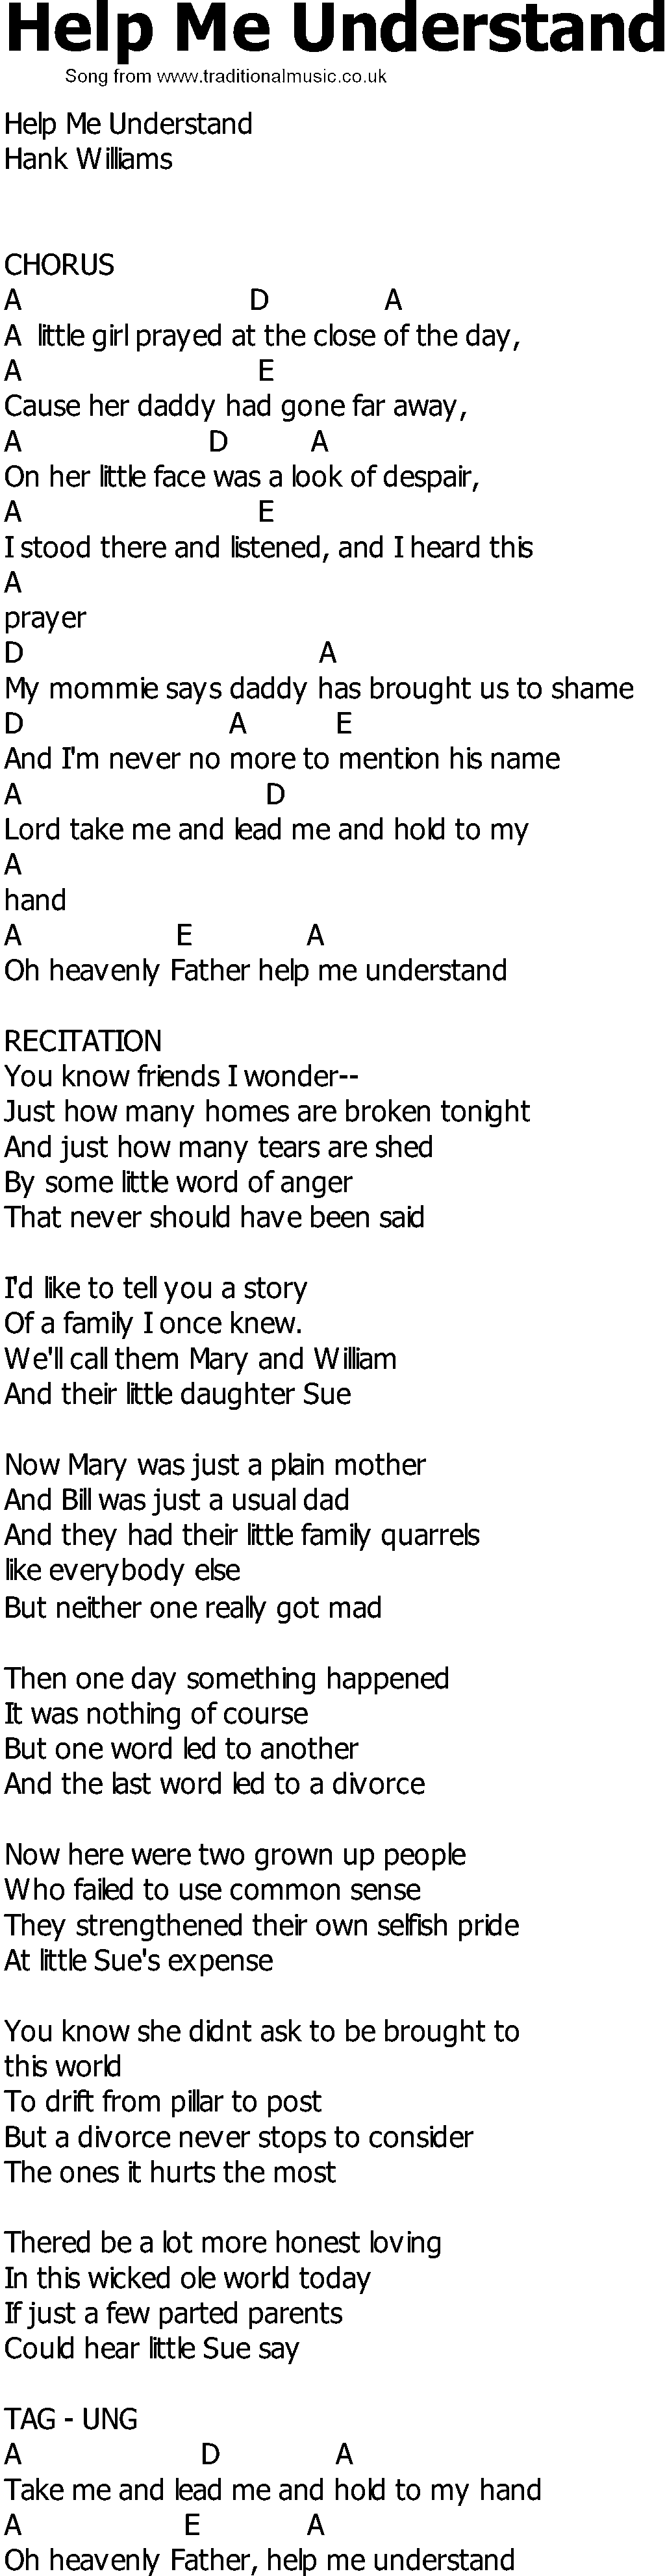 Old Country song lyrics with chords - Help Me Understand